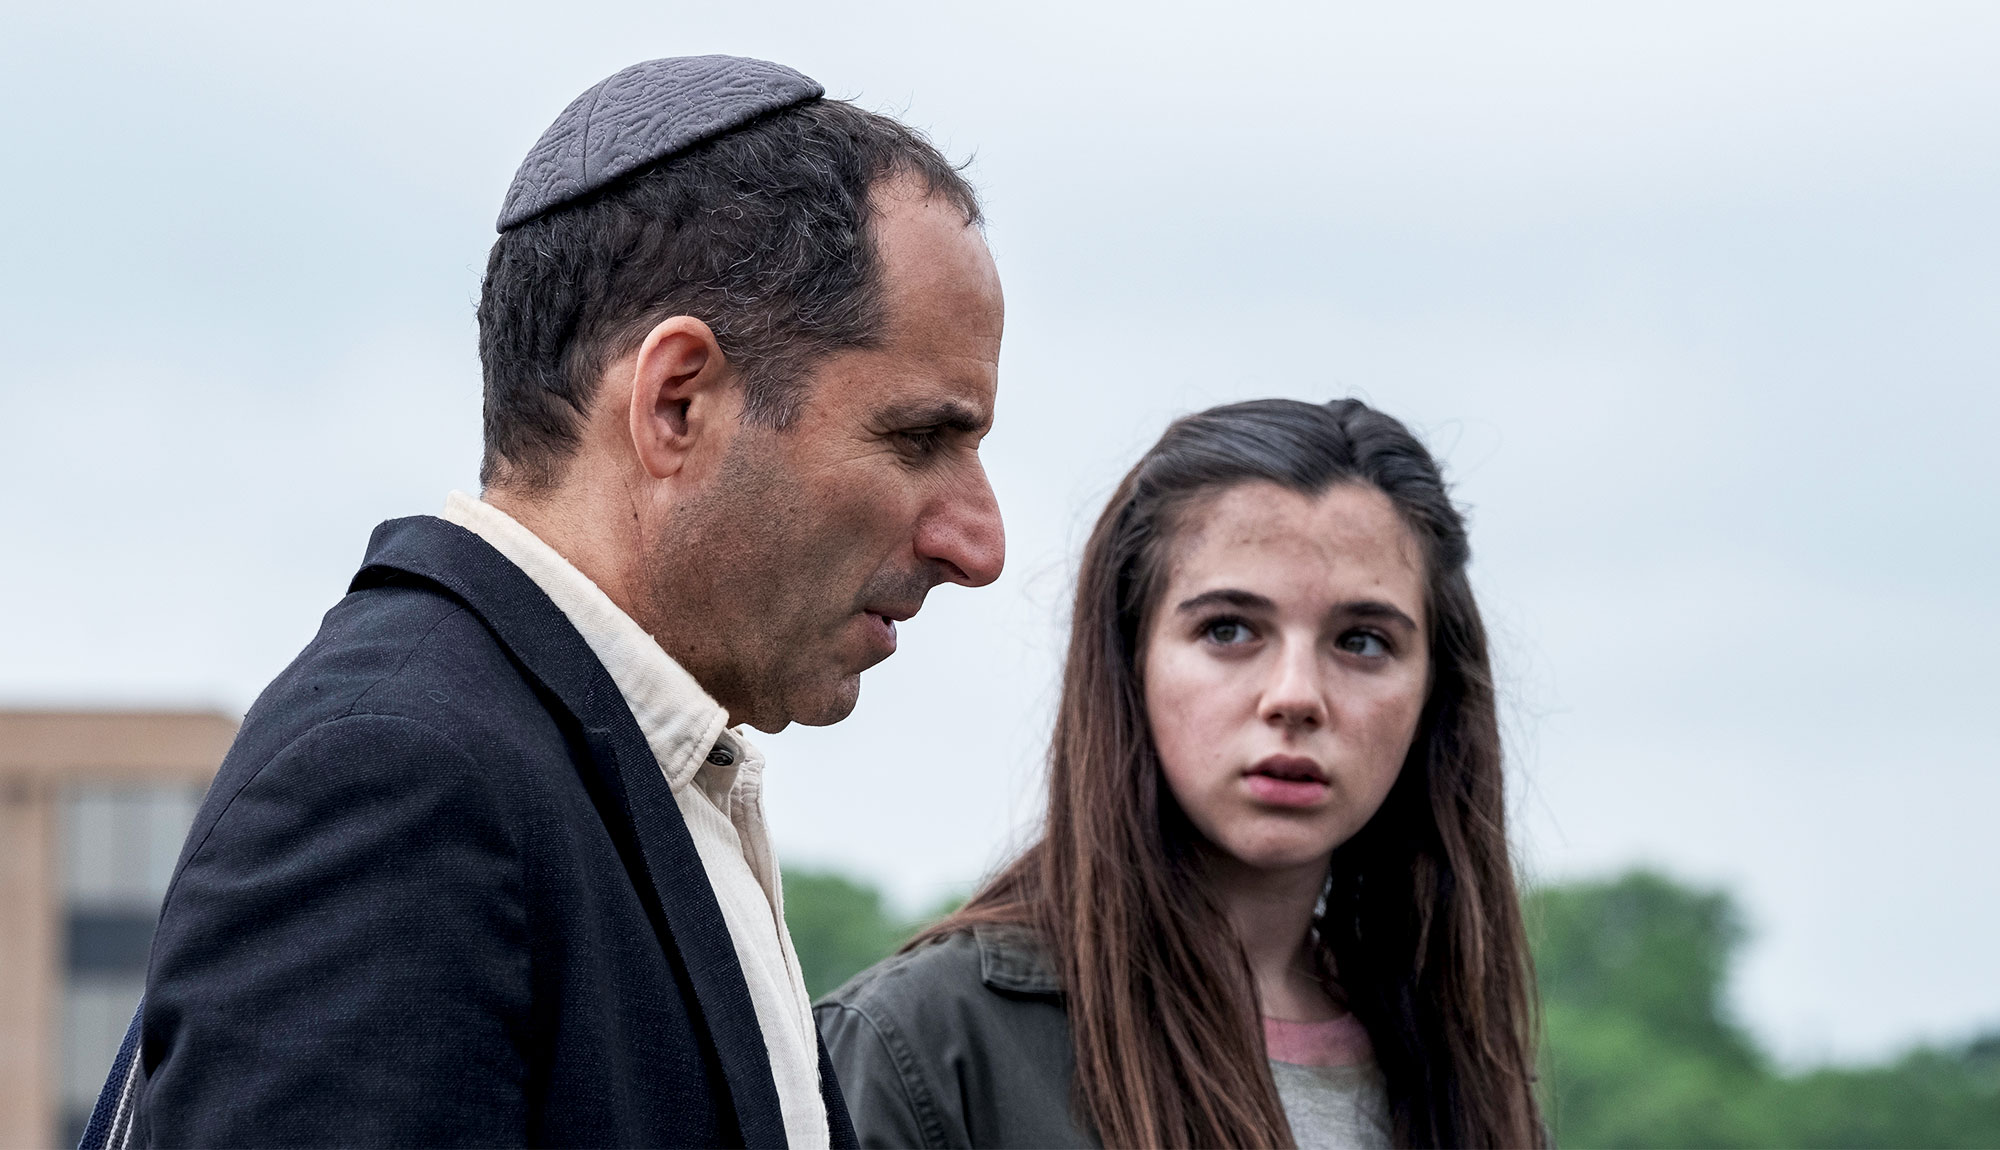 Peter Jacobson Joins The Cast In The Fear the Walking Dead Episode 512 Trailer